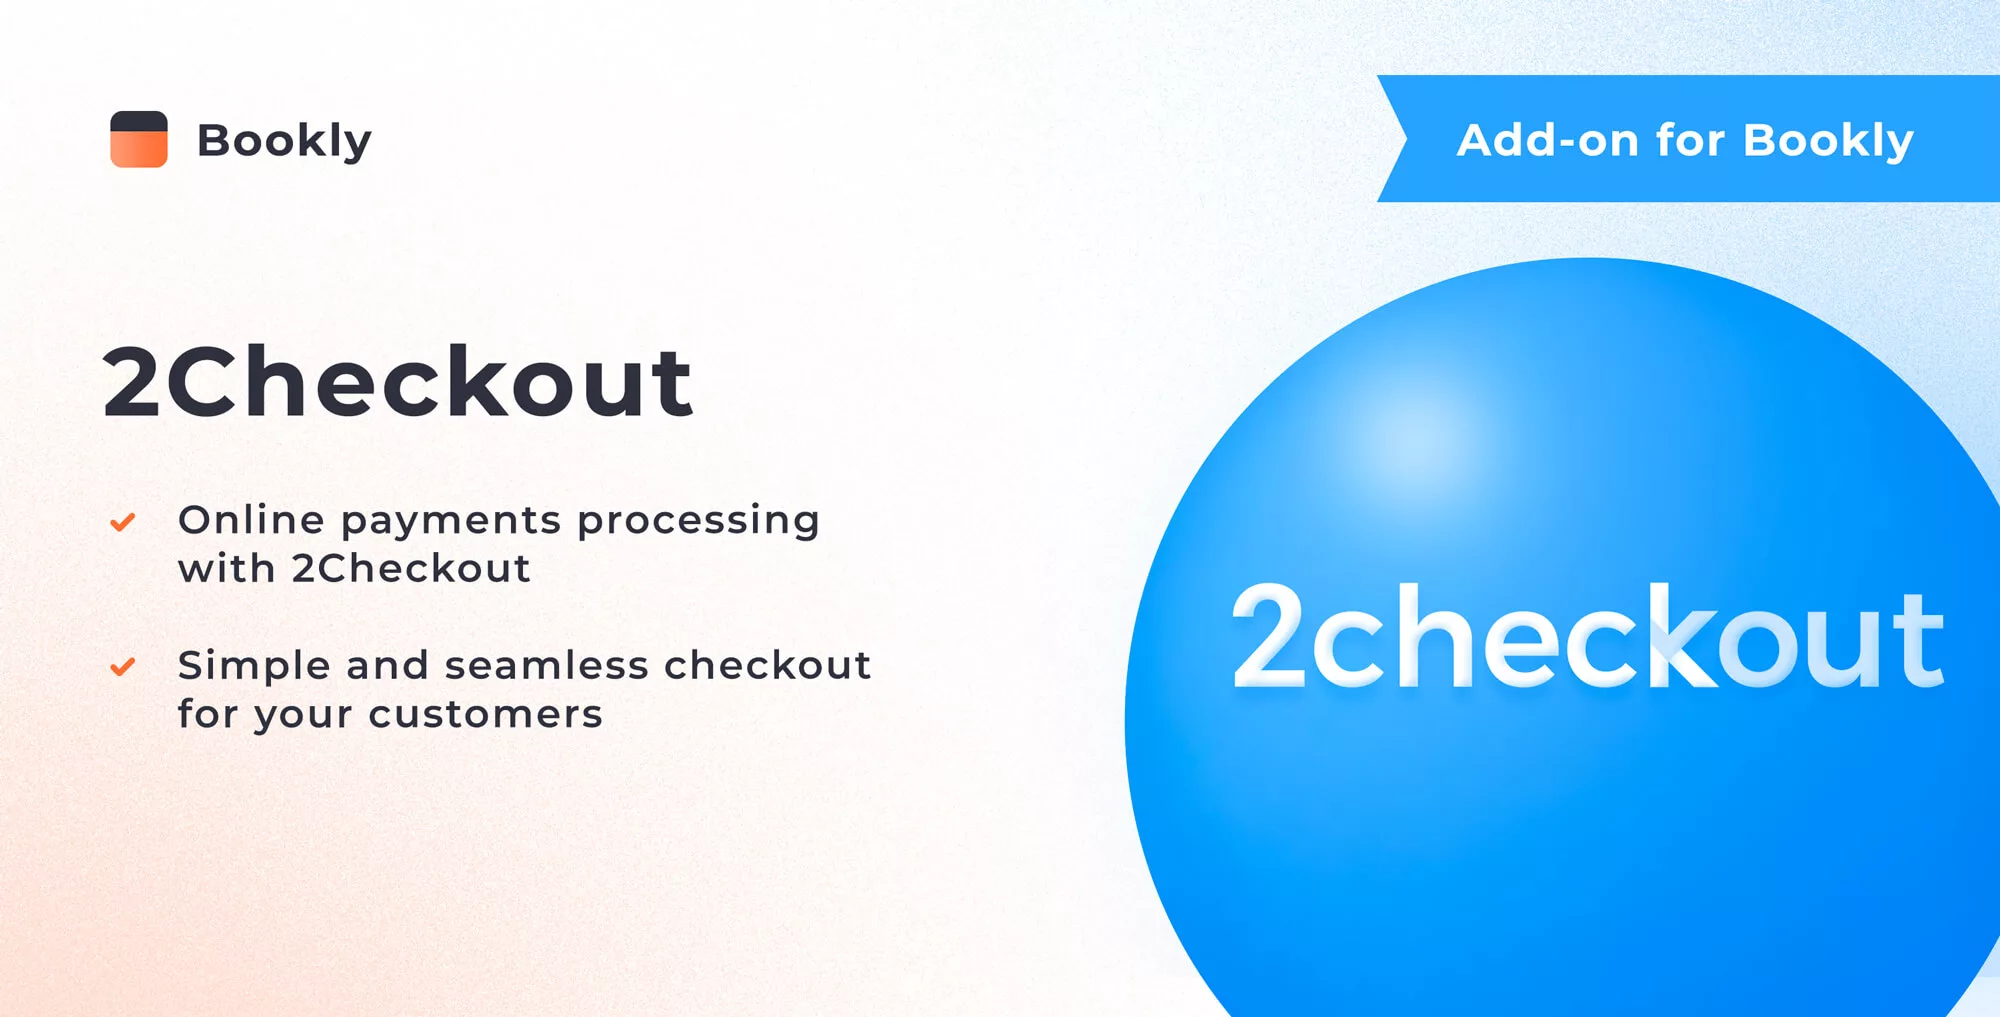 Bookly 2Checkout (Add-on)